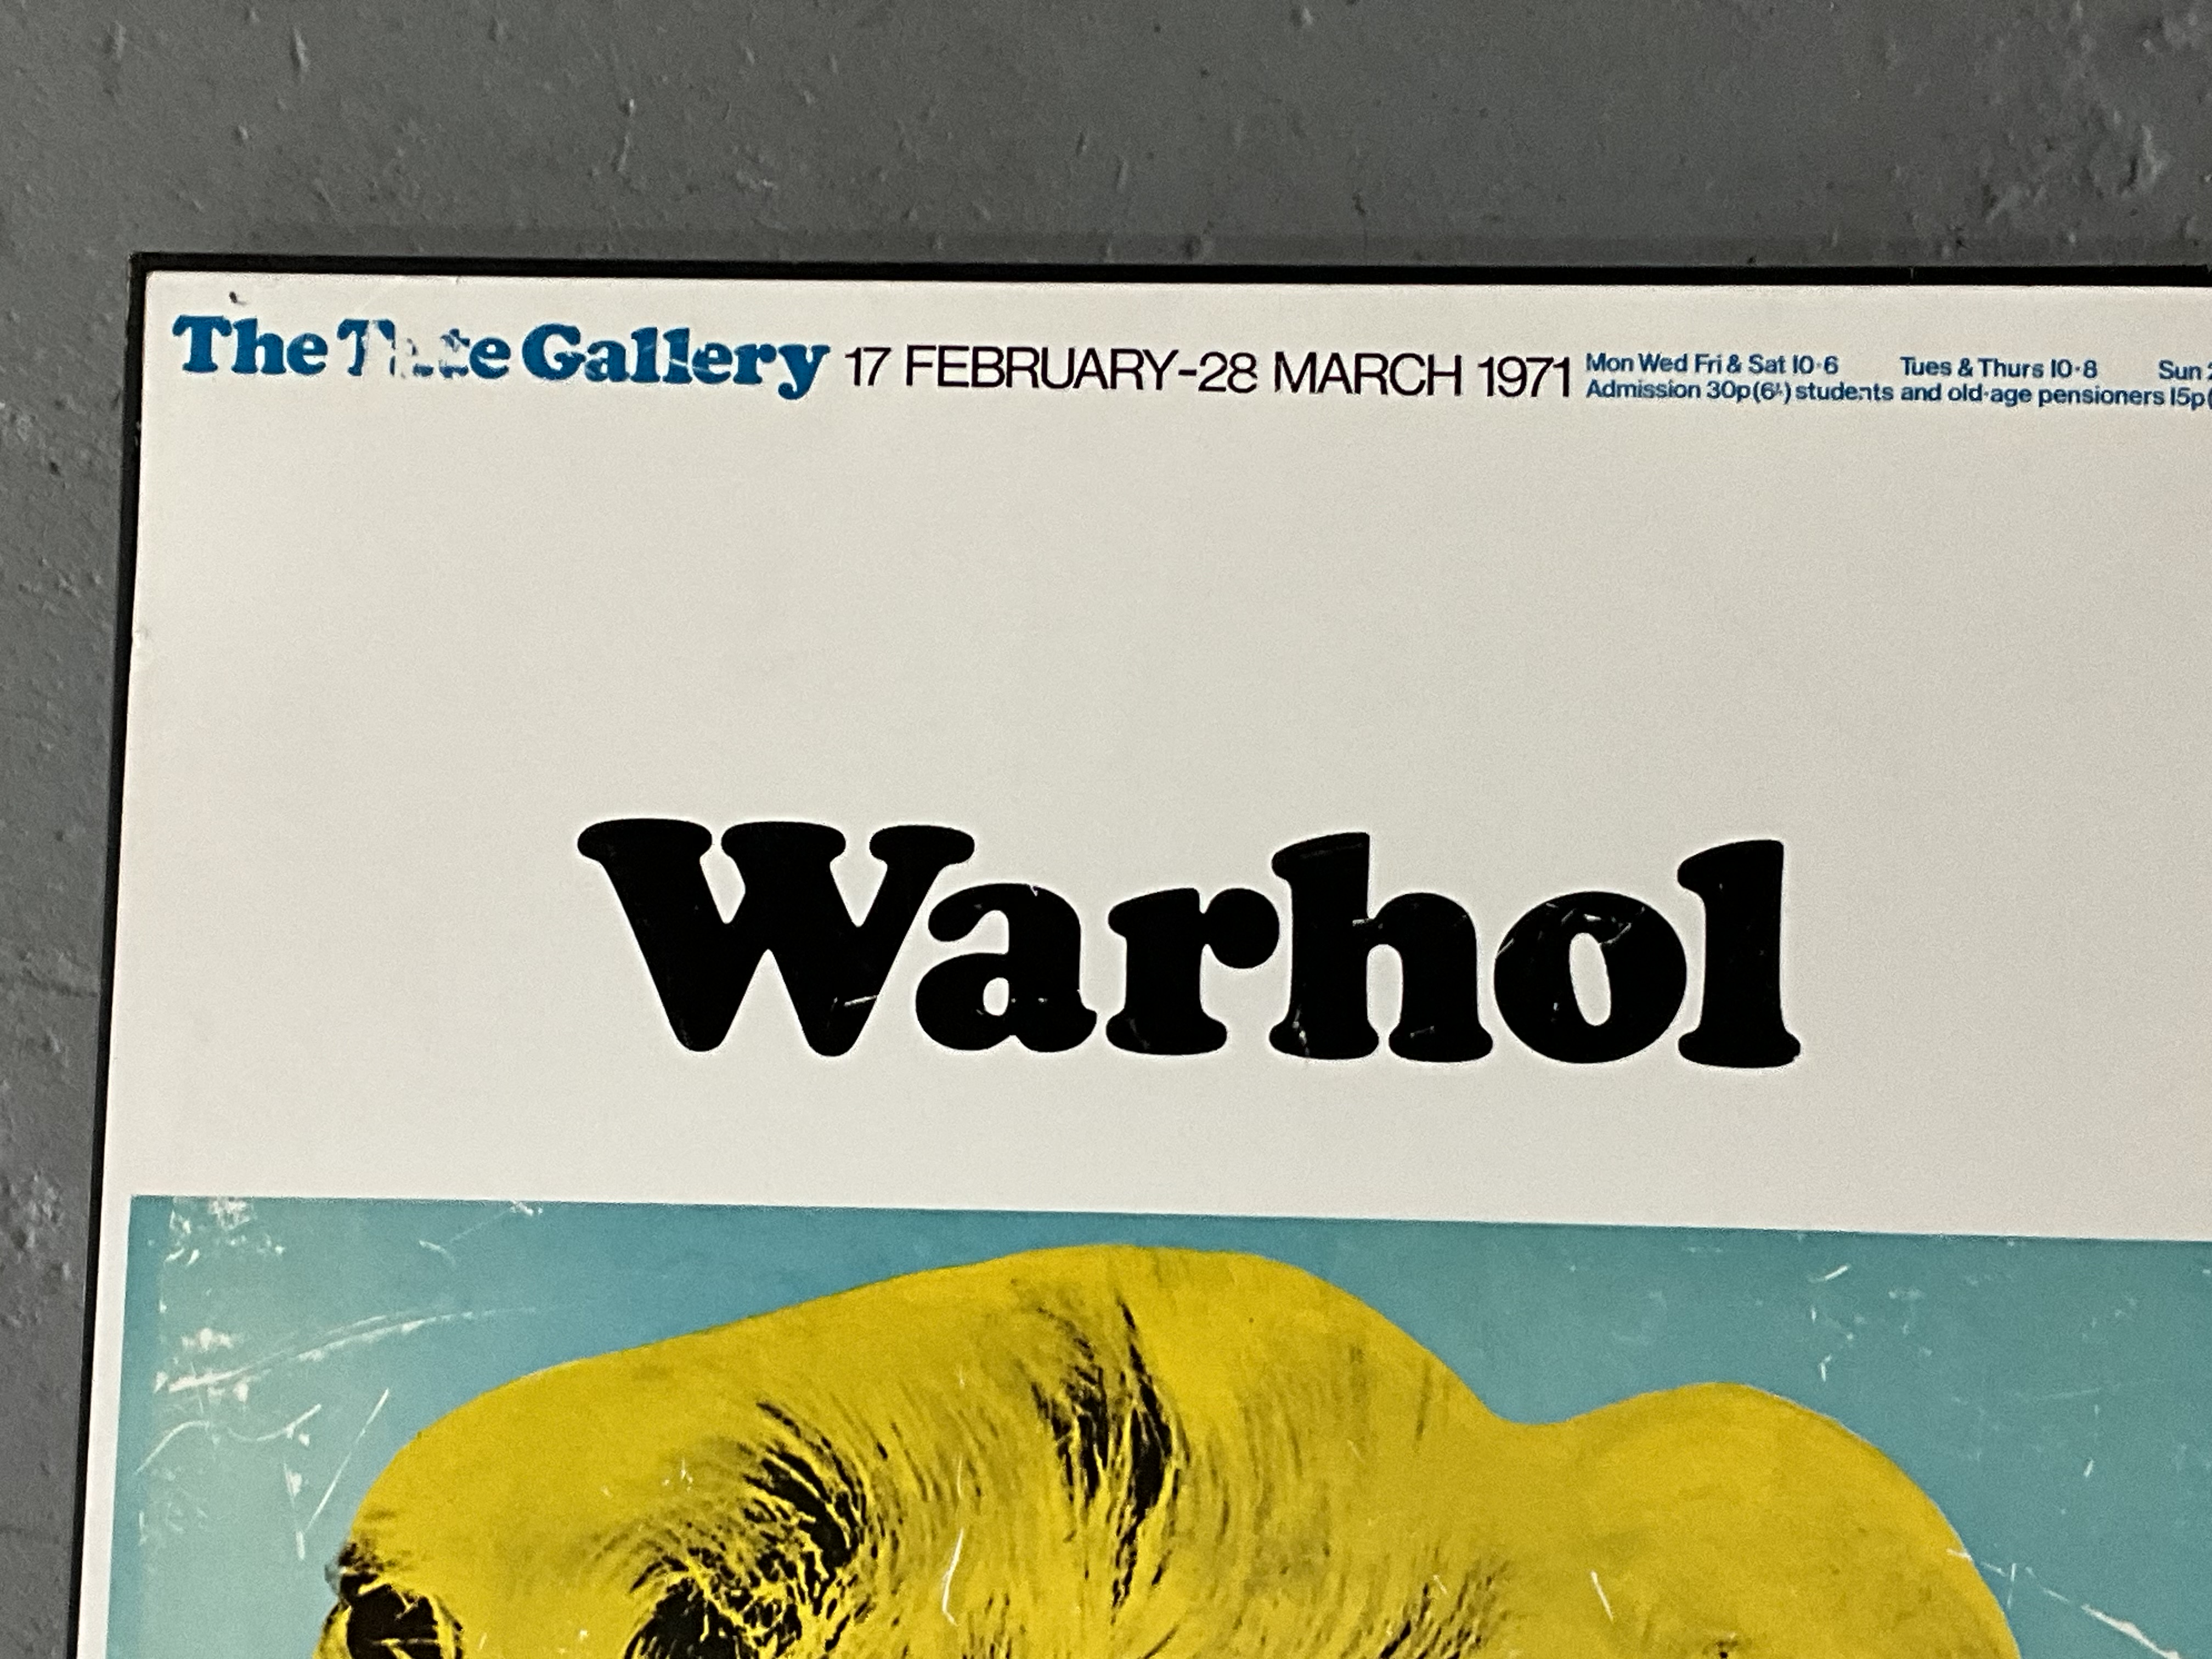 Andy Warhol Tate gallery poster framed 1971 - Image 2 of 3